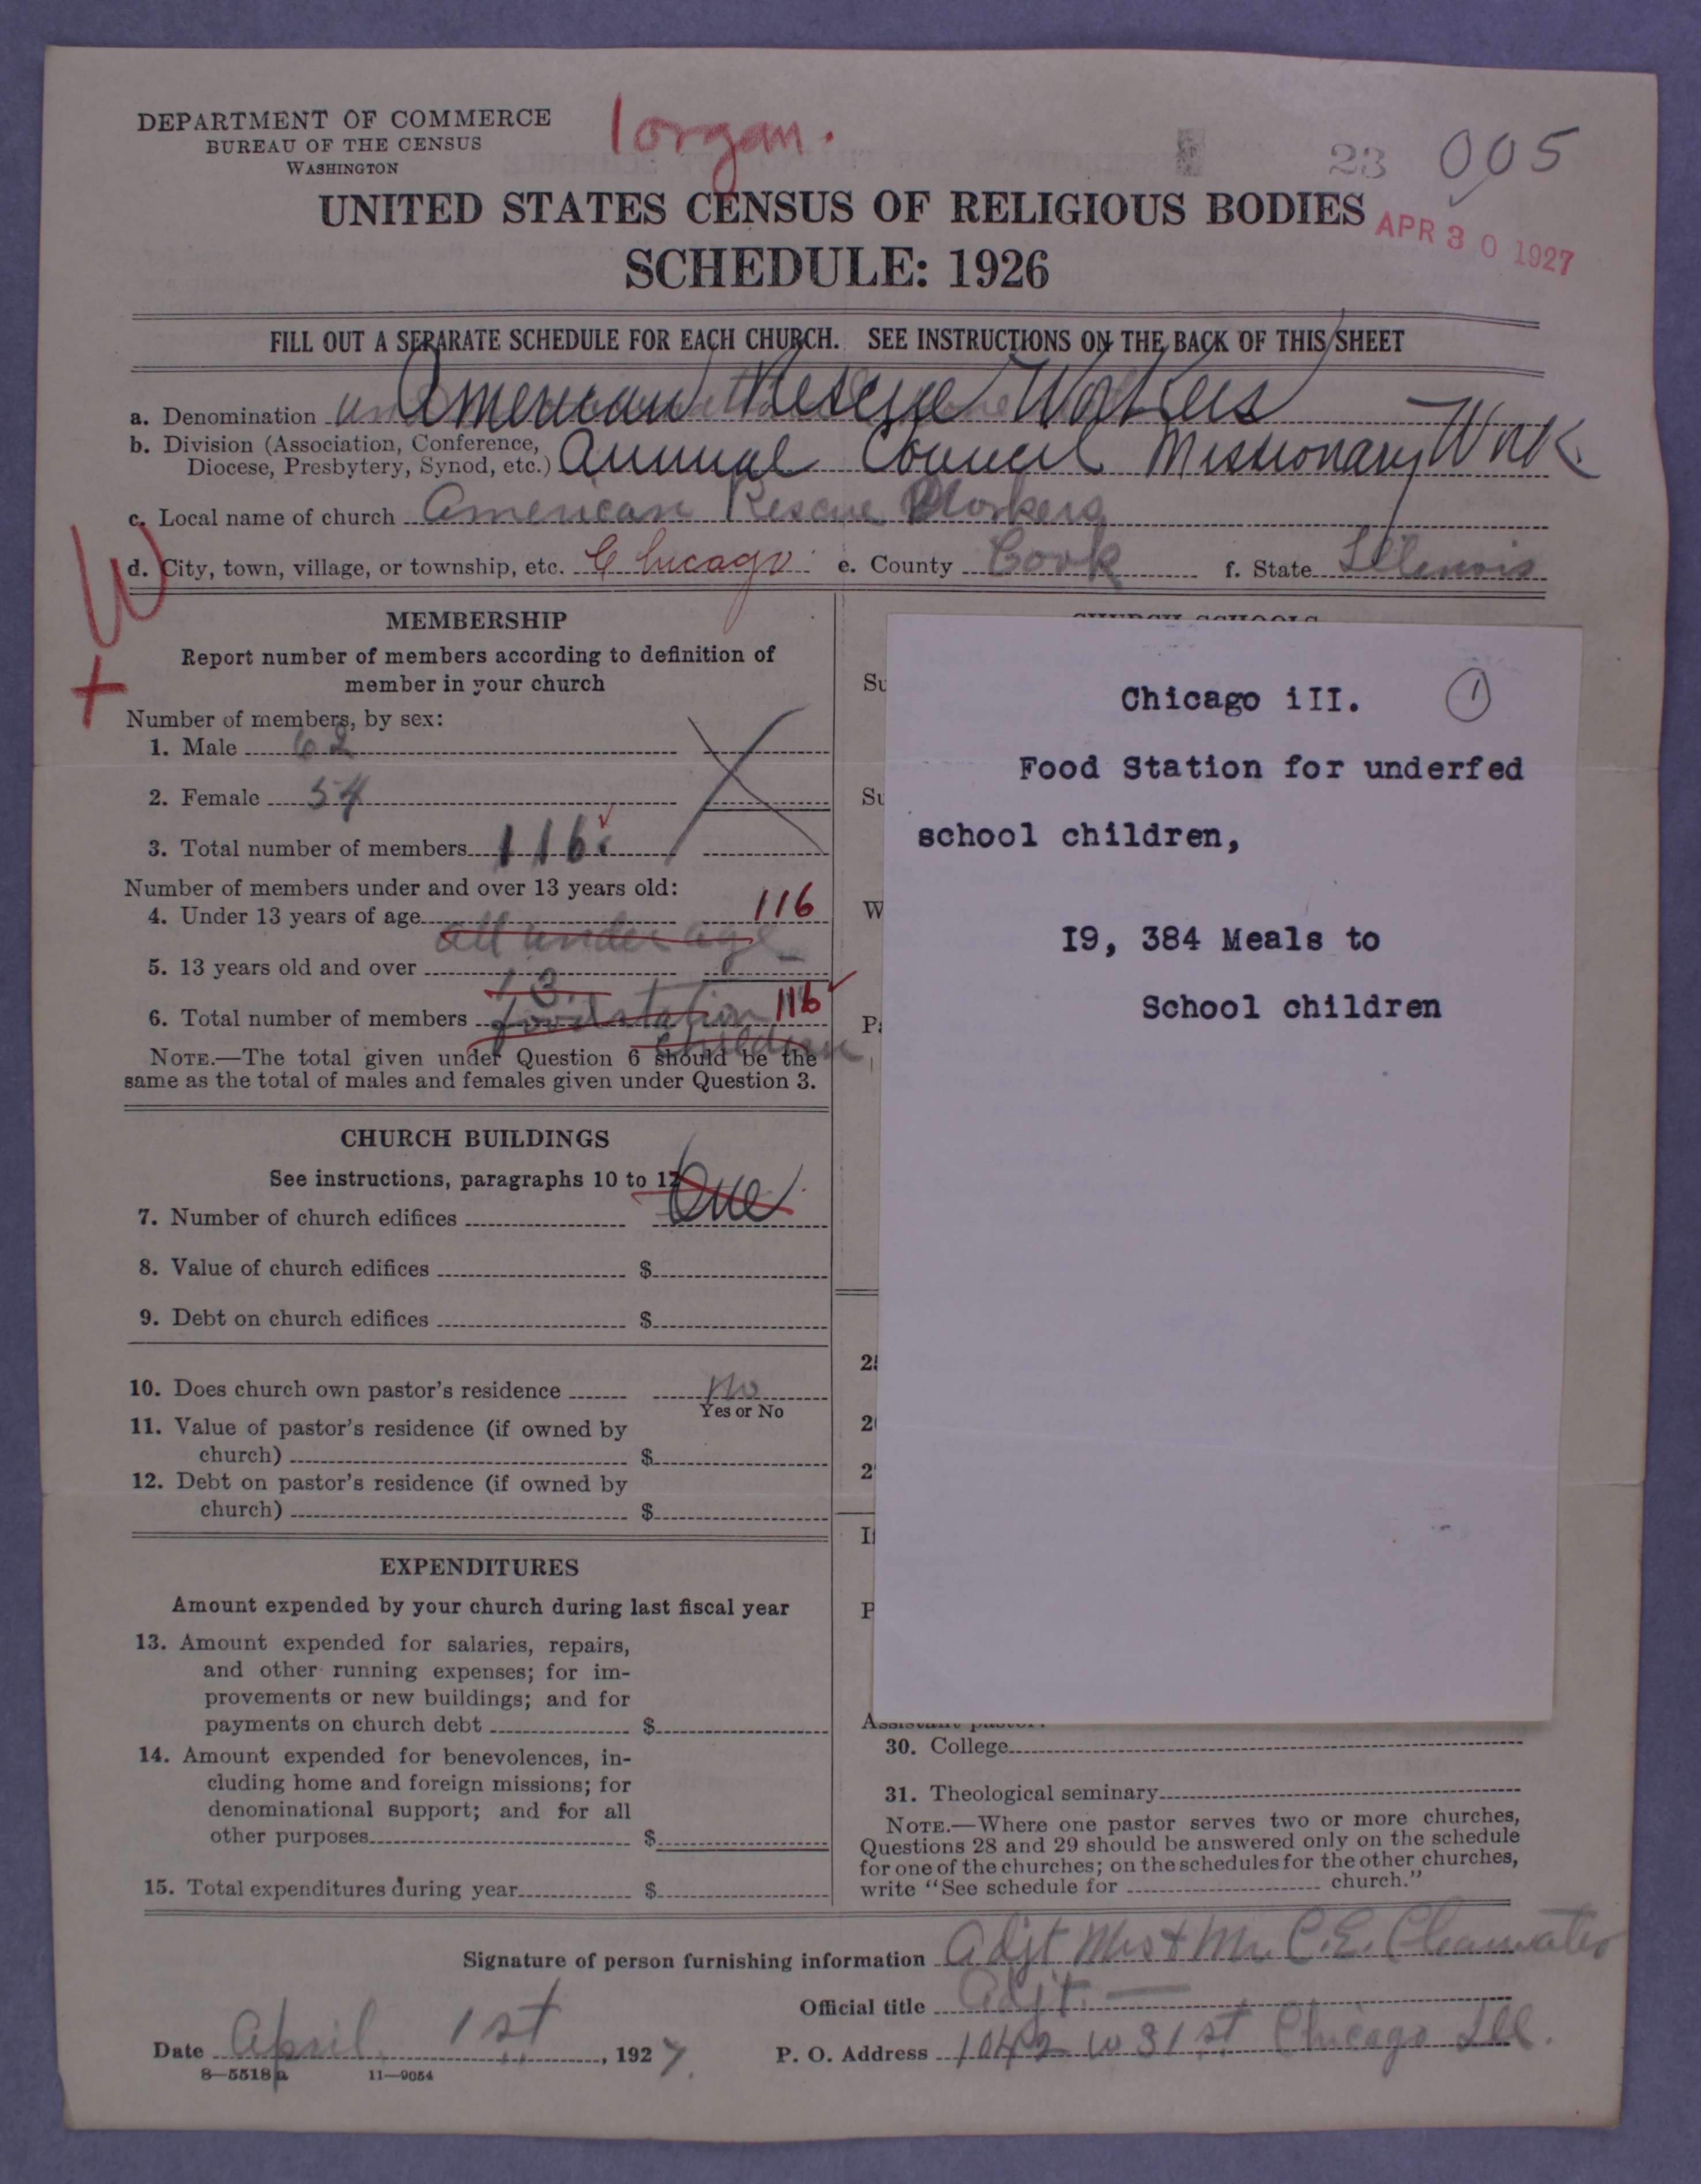 Figure 3. One of four schedules for the American Rescue Workers in Chicago, IL. This schedule describes the food station that the ARW operated to serve “underfed school children.” In one year, this mission provided 19, 384 meals for children in Chicago.